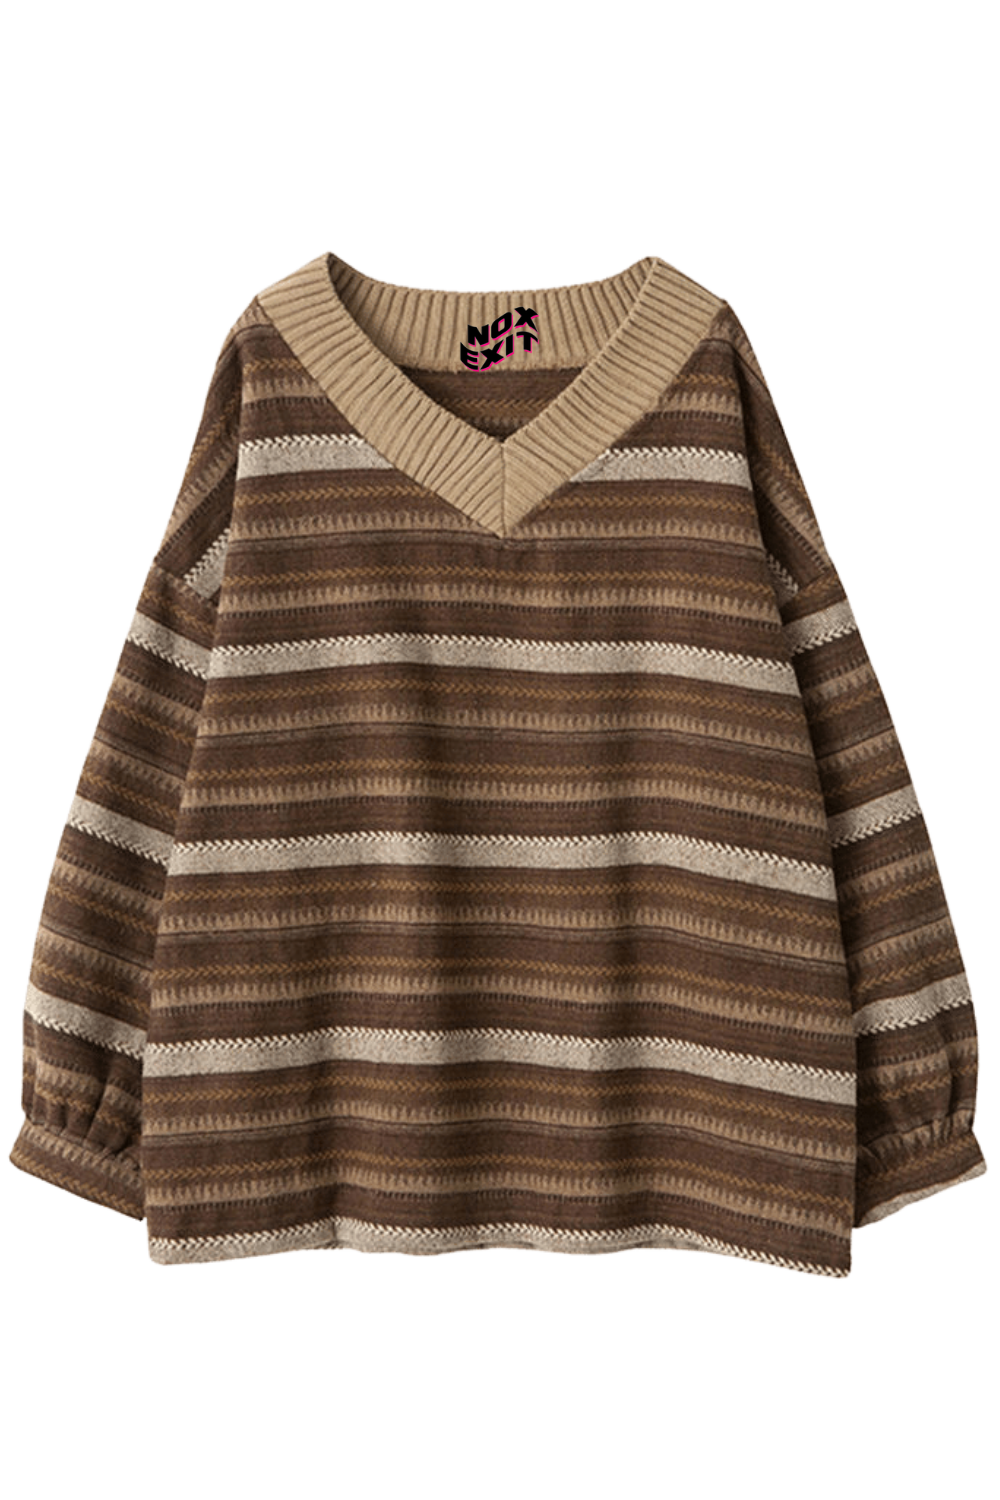 80s grandma sweater knit pinterest thrift vintage shop buy outfit fashion y2k grunge outfits alternative kidcore brown neutral sweater knit noxexit